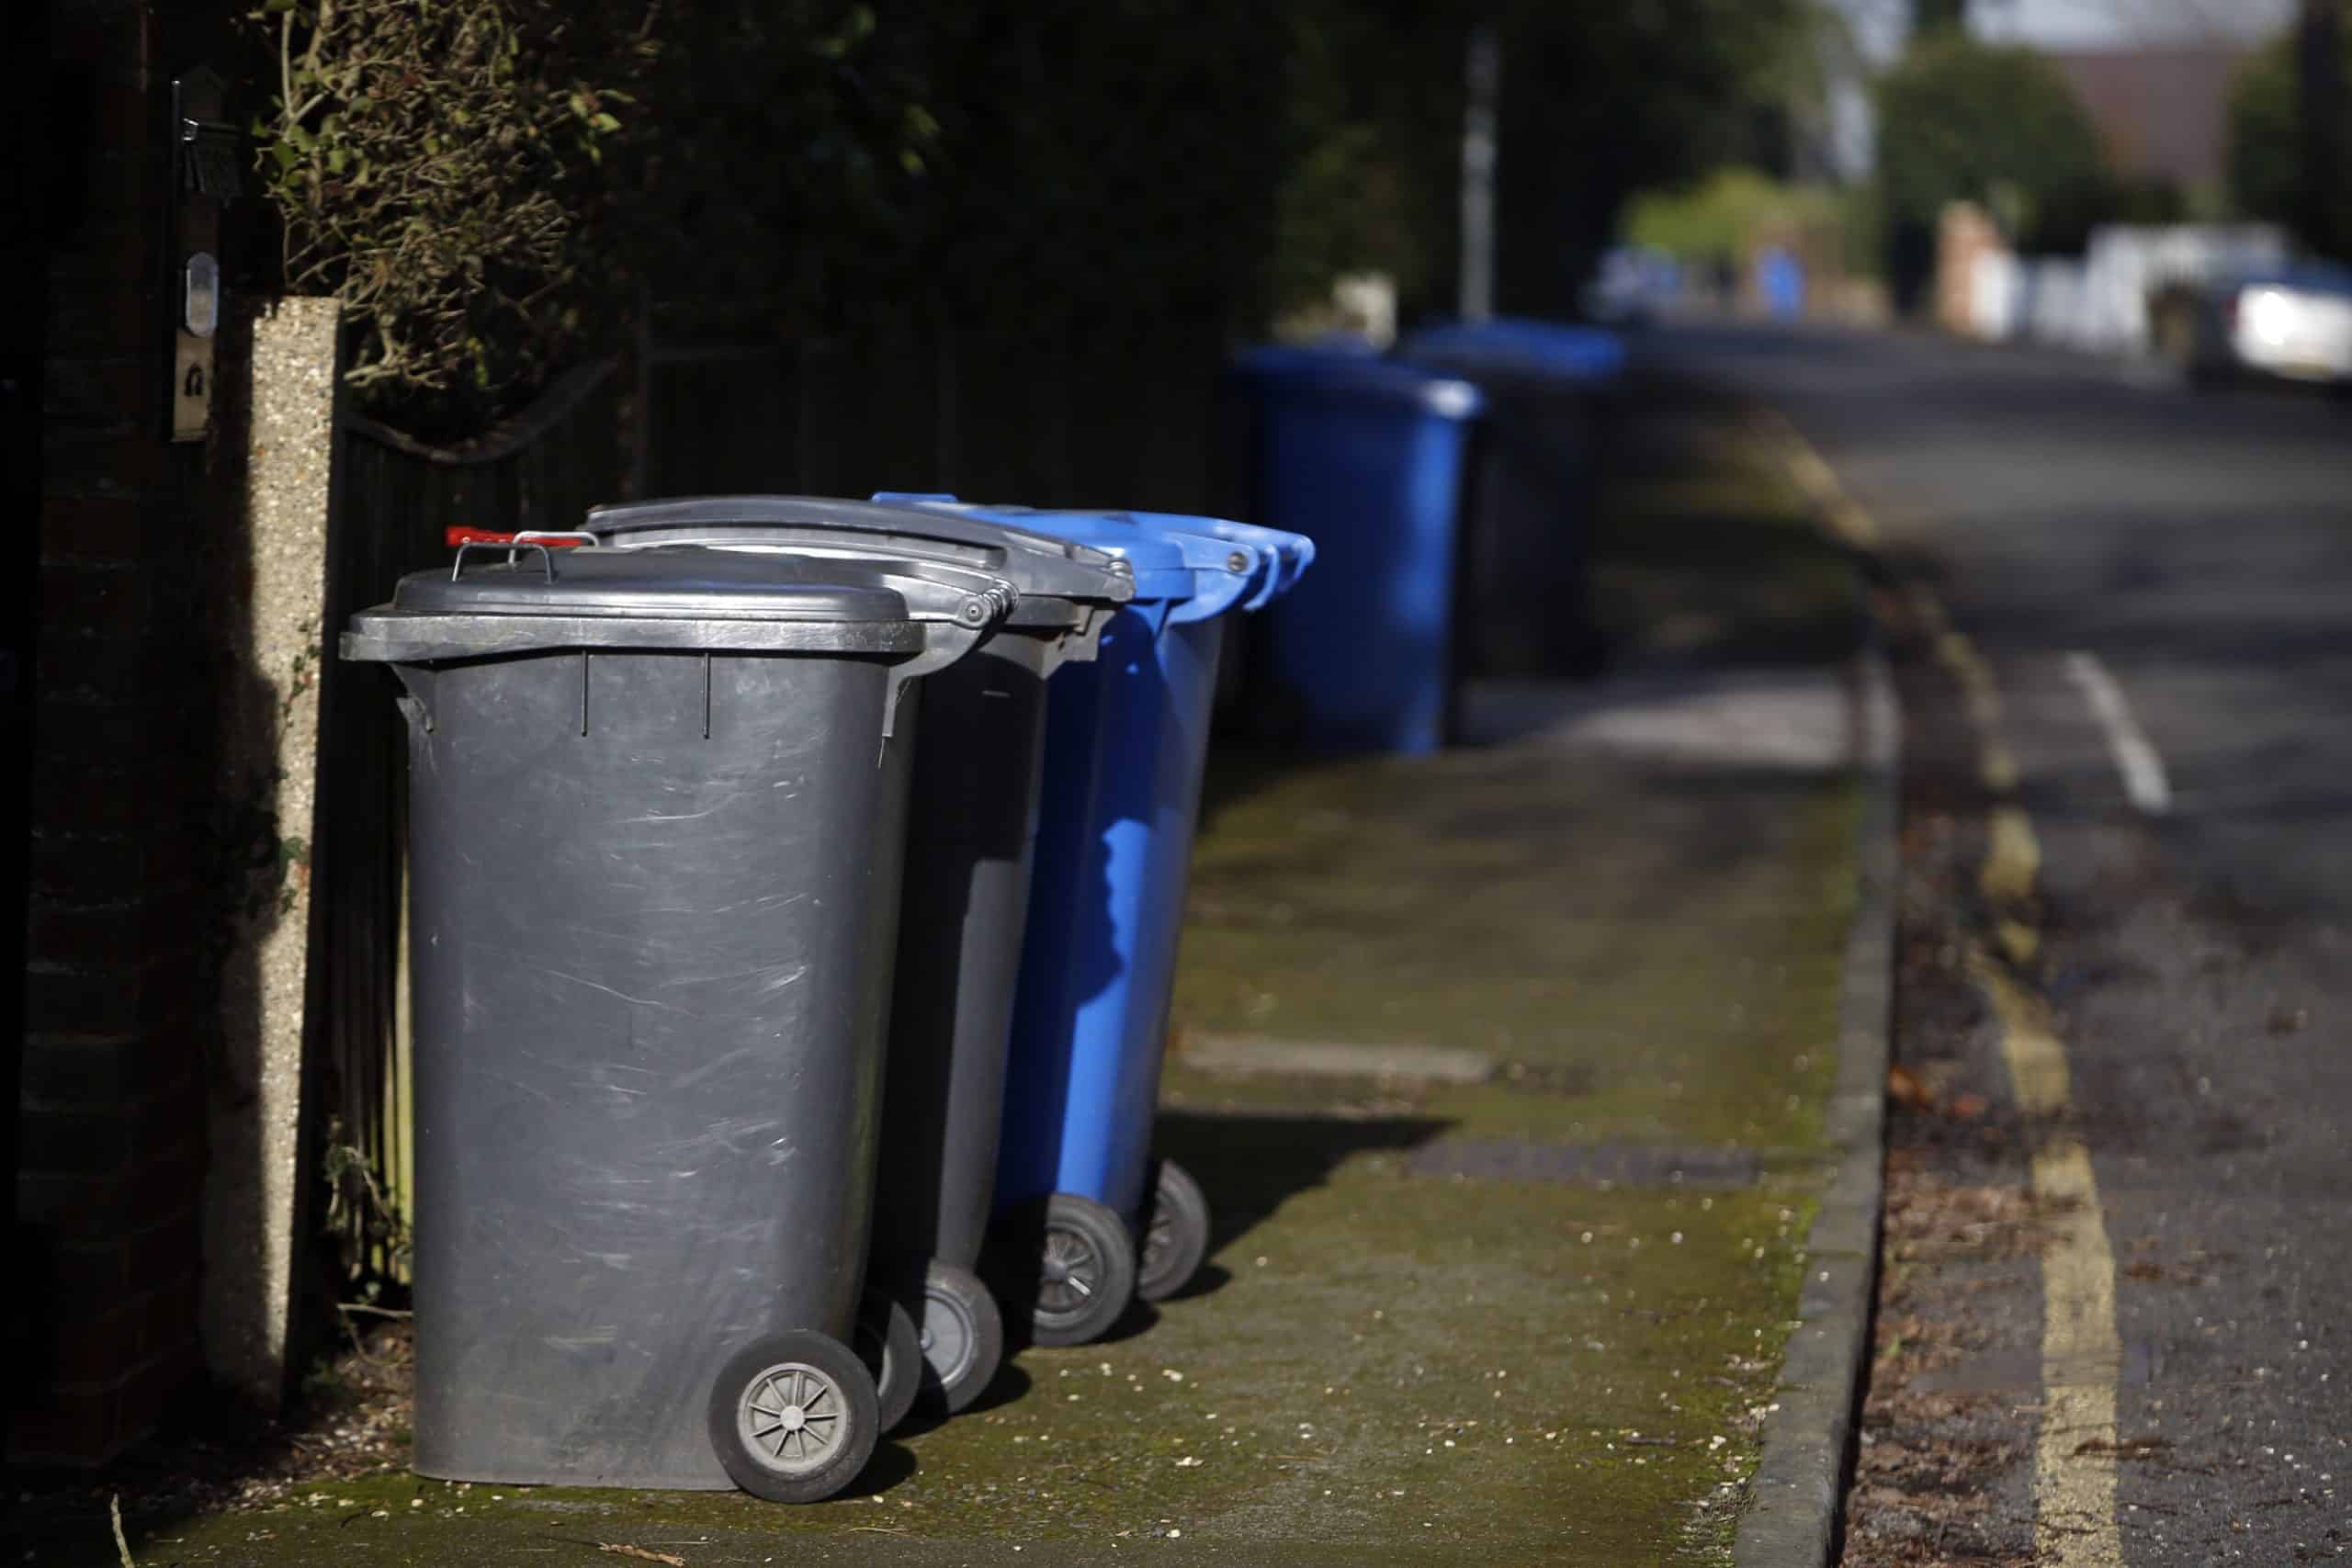 District councils warn about ‘wave of waste’ from lockdown households